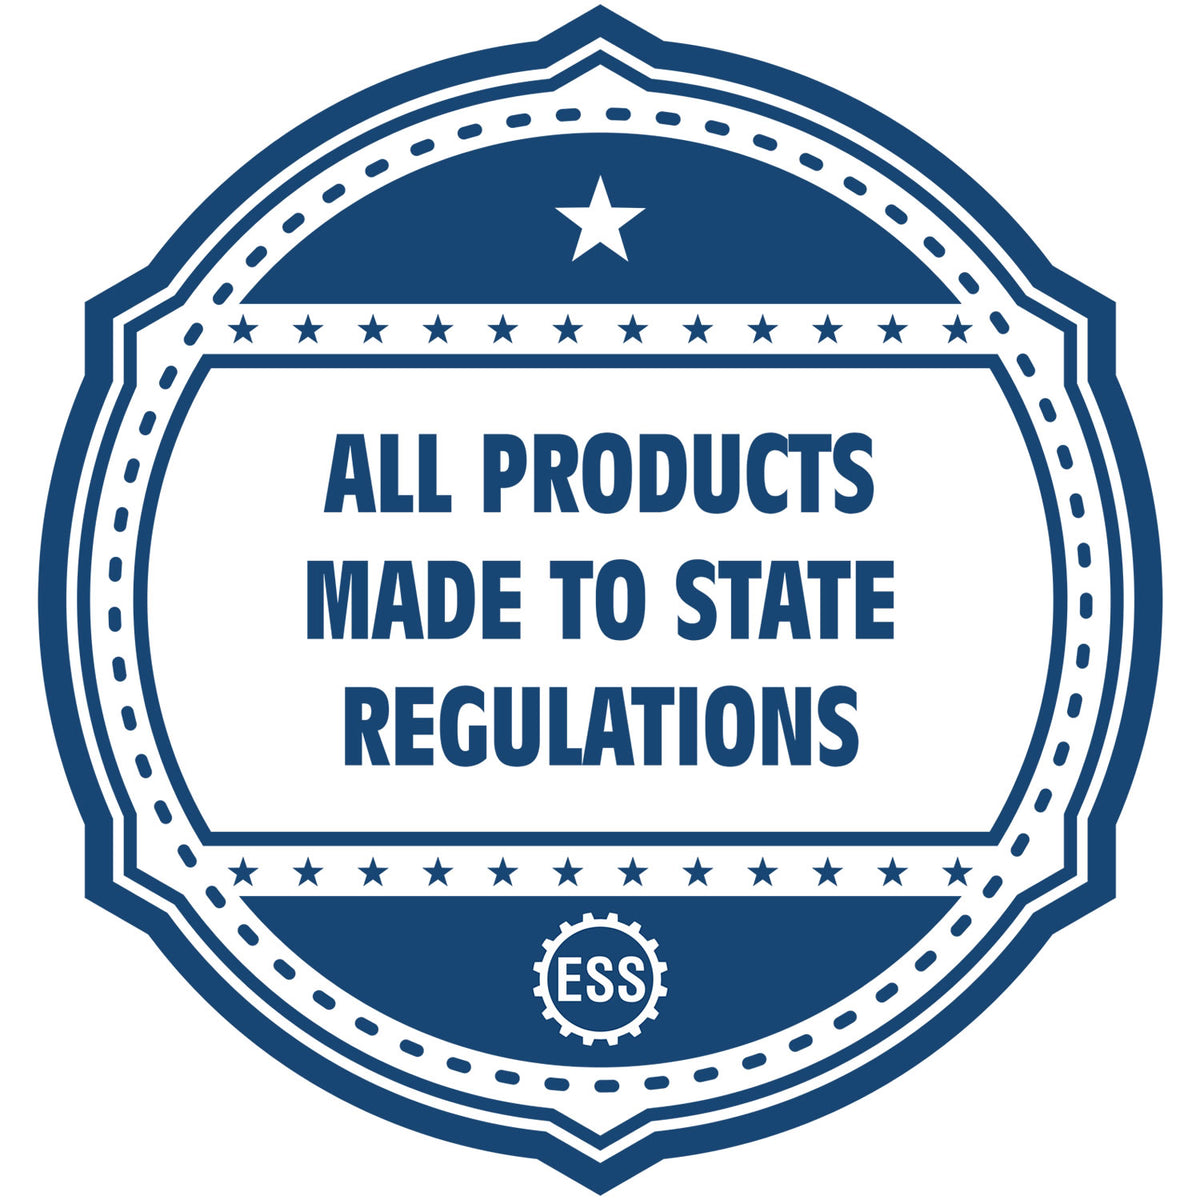 An icon or badge element for the PSI Vermont Notary Stamp showing that this product is made in compliance with state regulations.